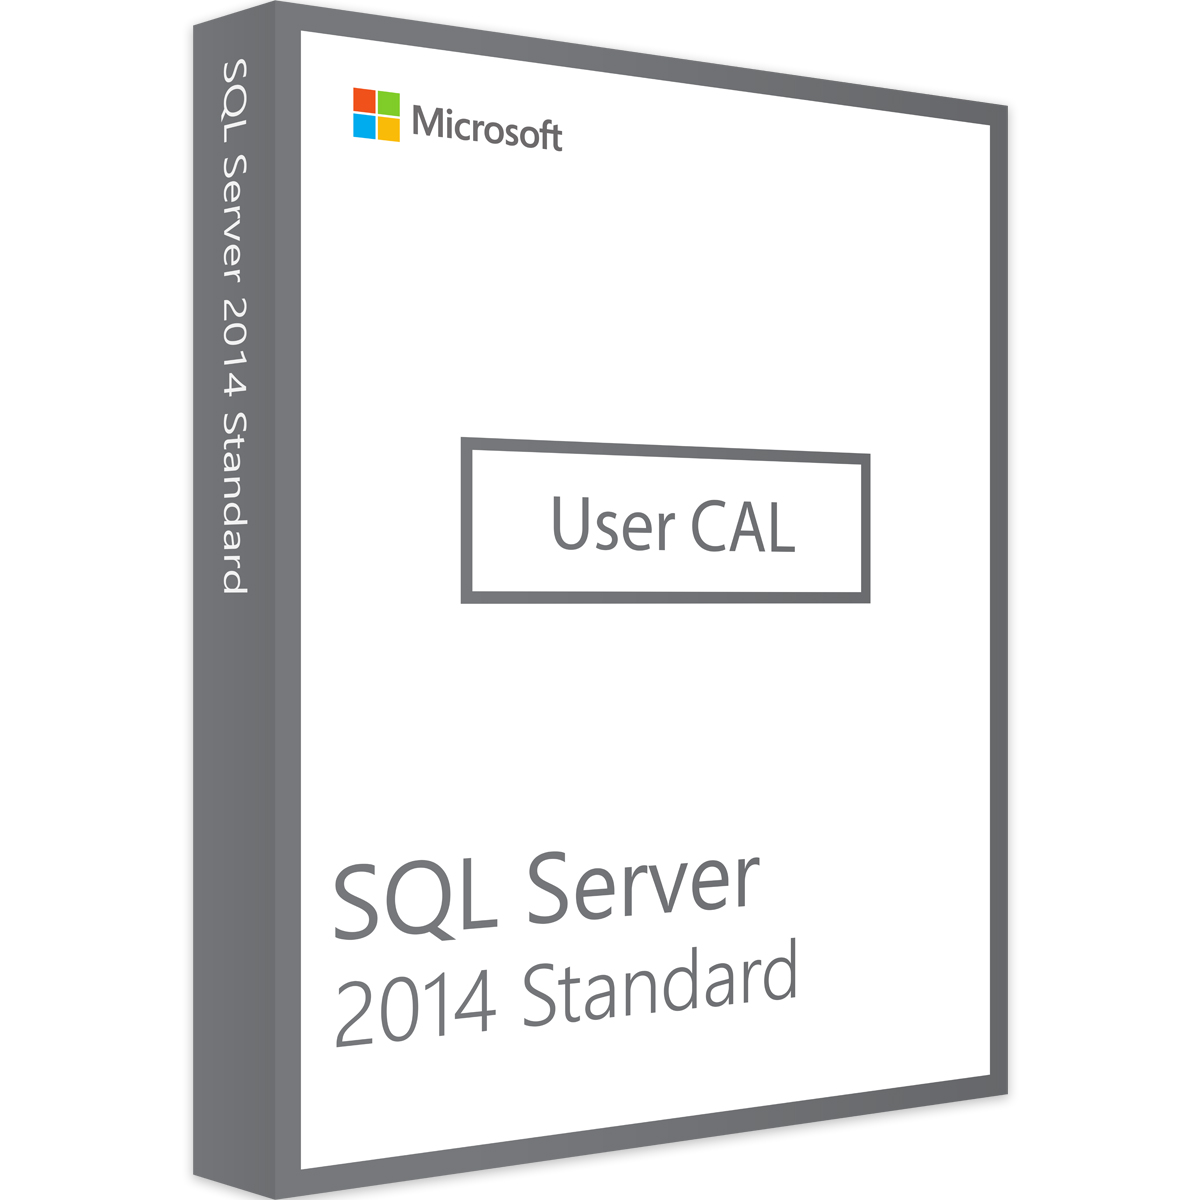 User std. Windows Server 2014. Device cal. Microsoft Identity Manager cal. SQLCAL 2019 SNGL OLP nl USRCAL.